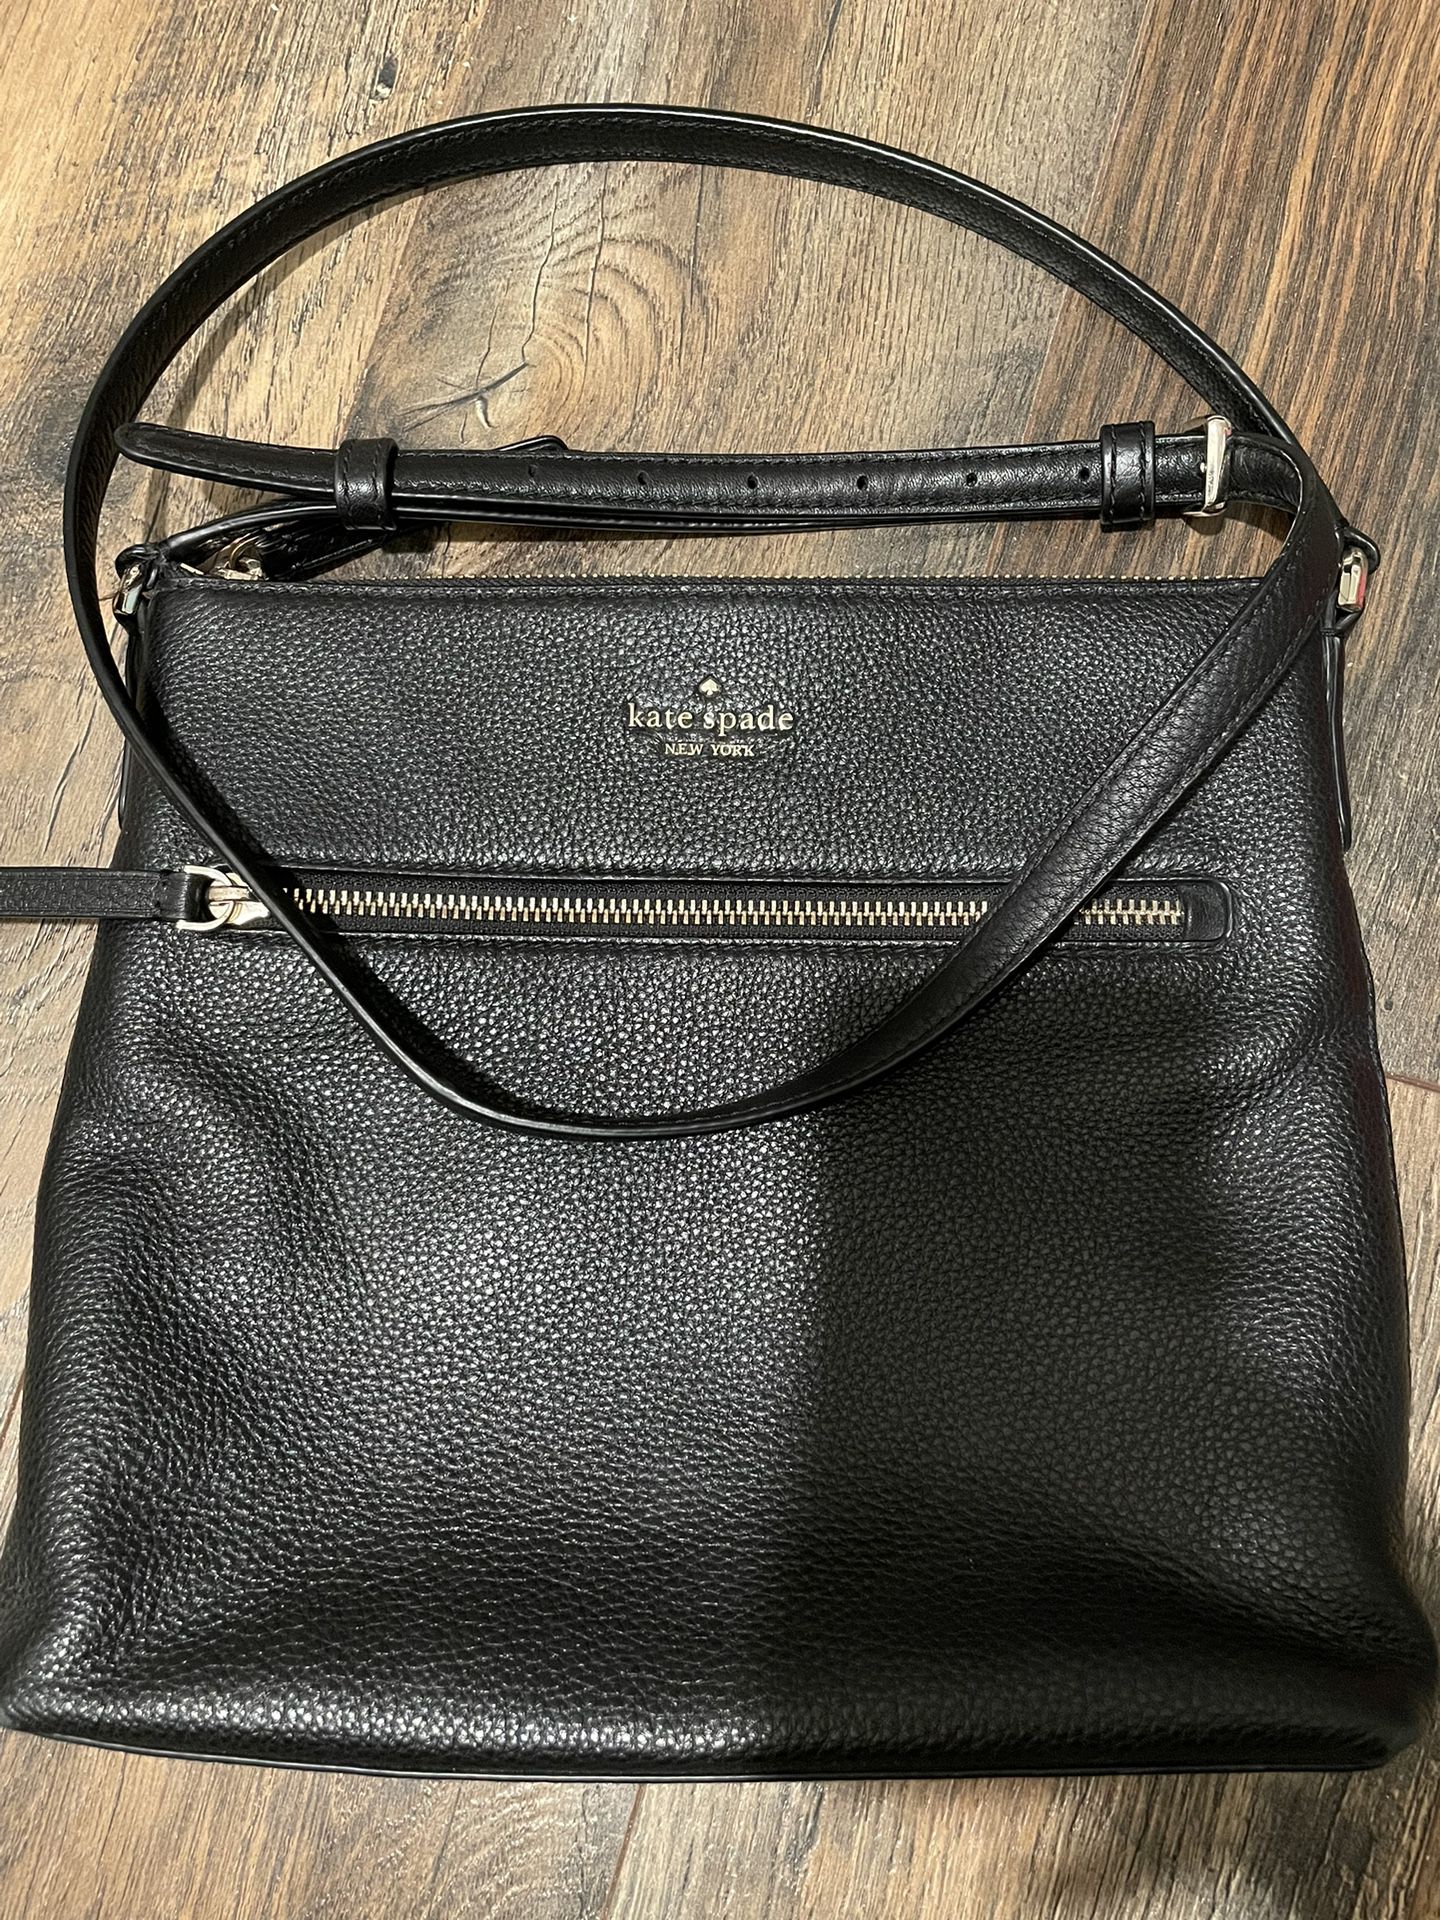 Kate Spade Crossbody (used, in good condition)